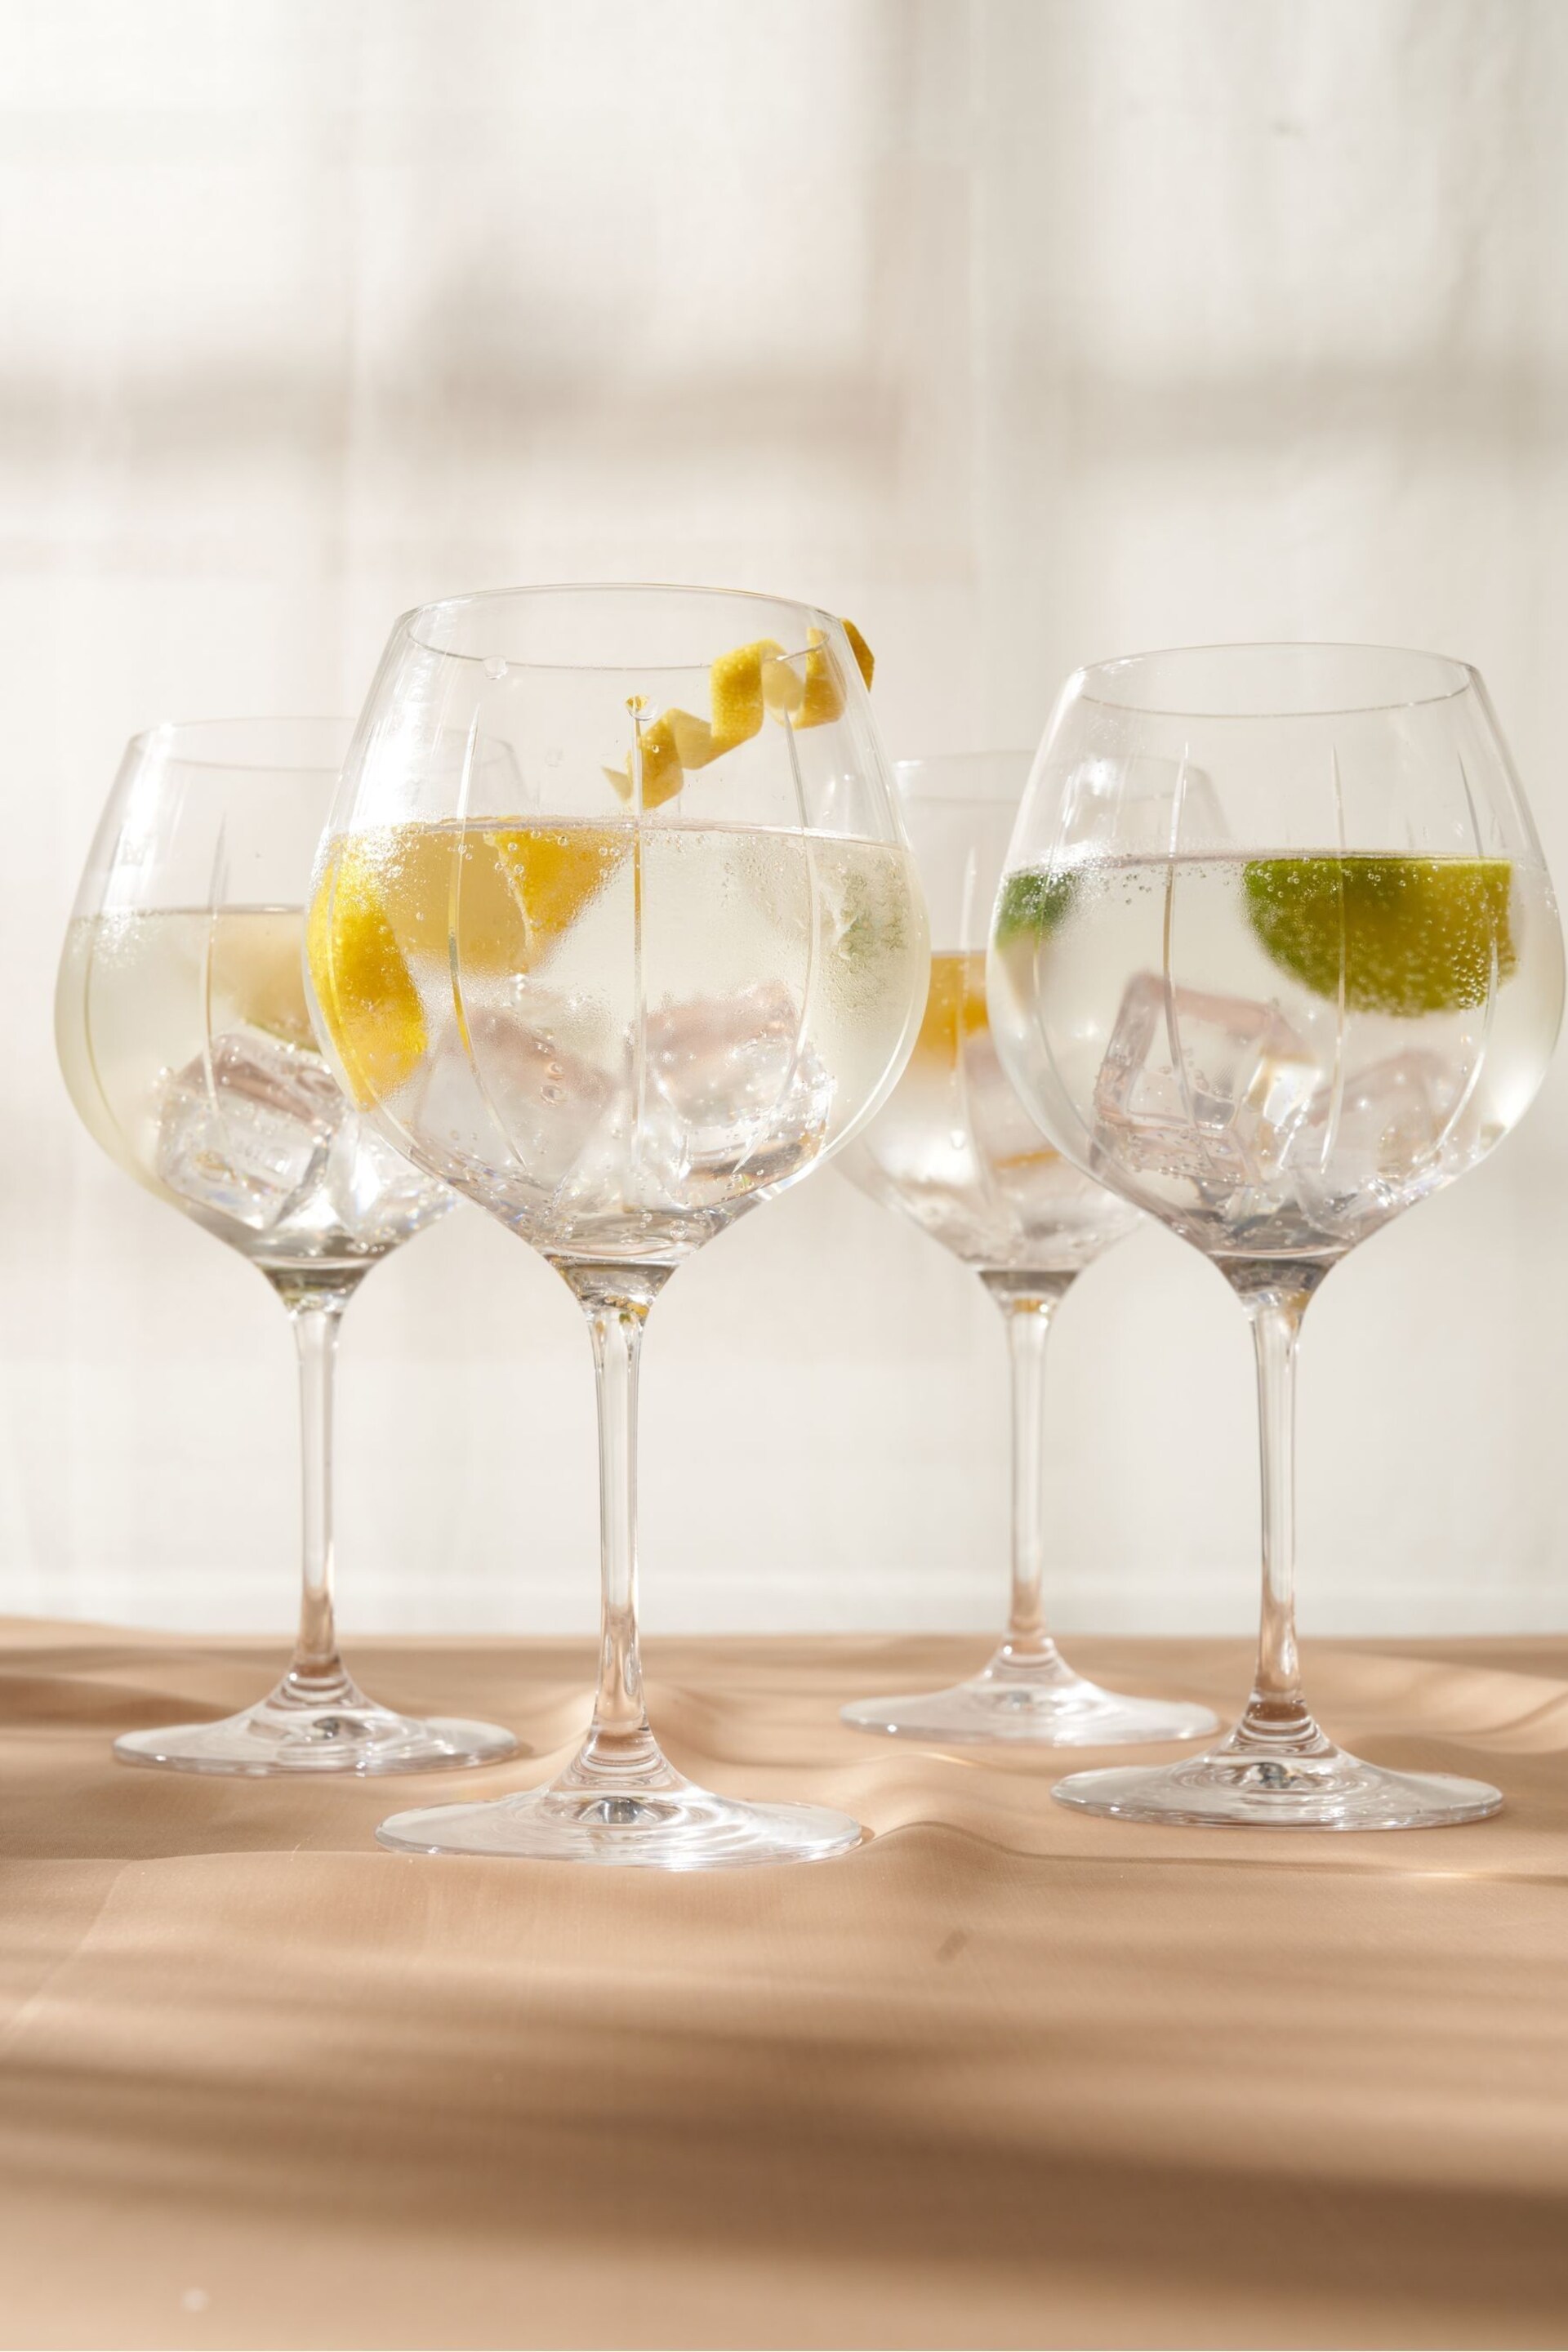 Truly Set of 4 Clear Soho Cut Crystal Gin Glasses - Image 1 of 4